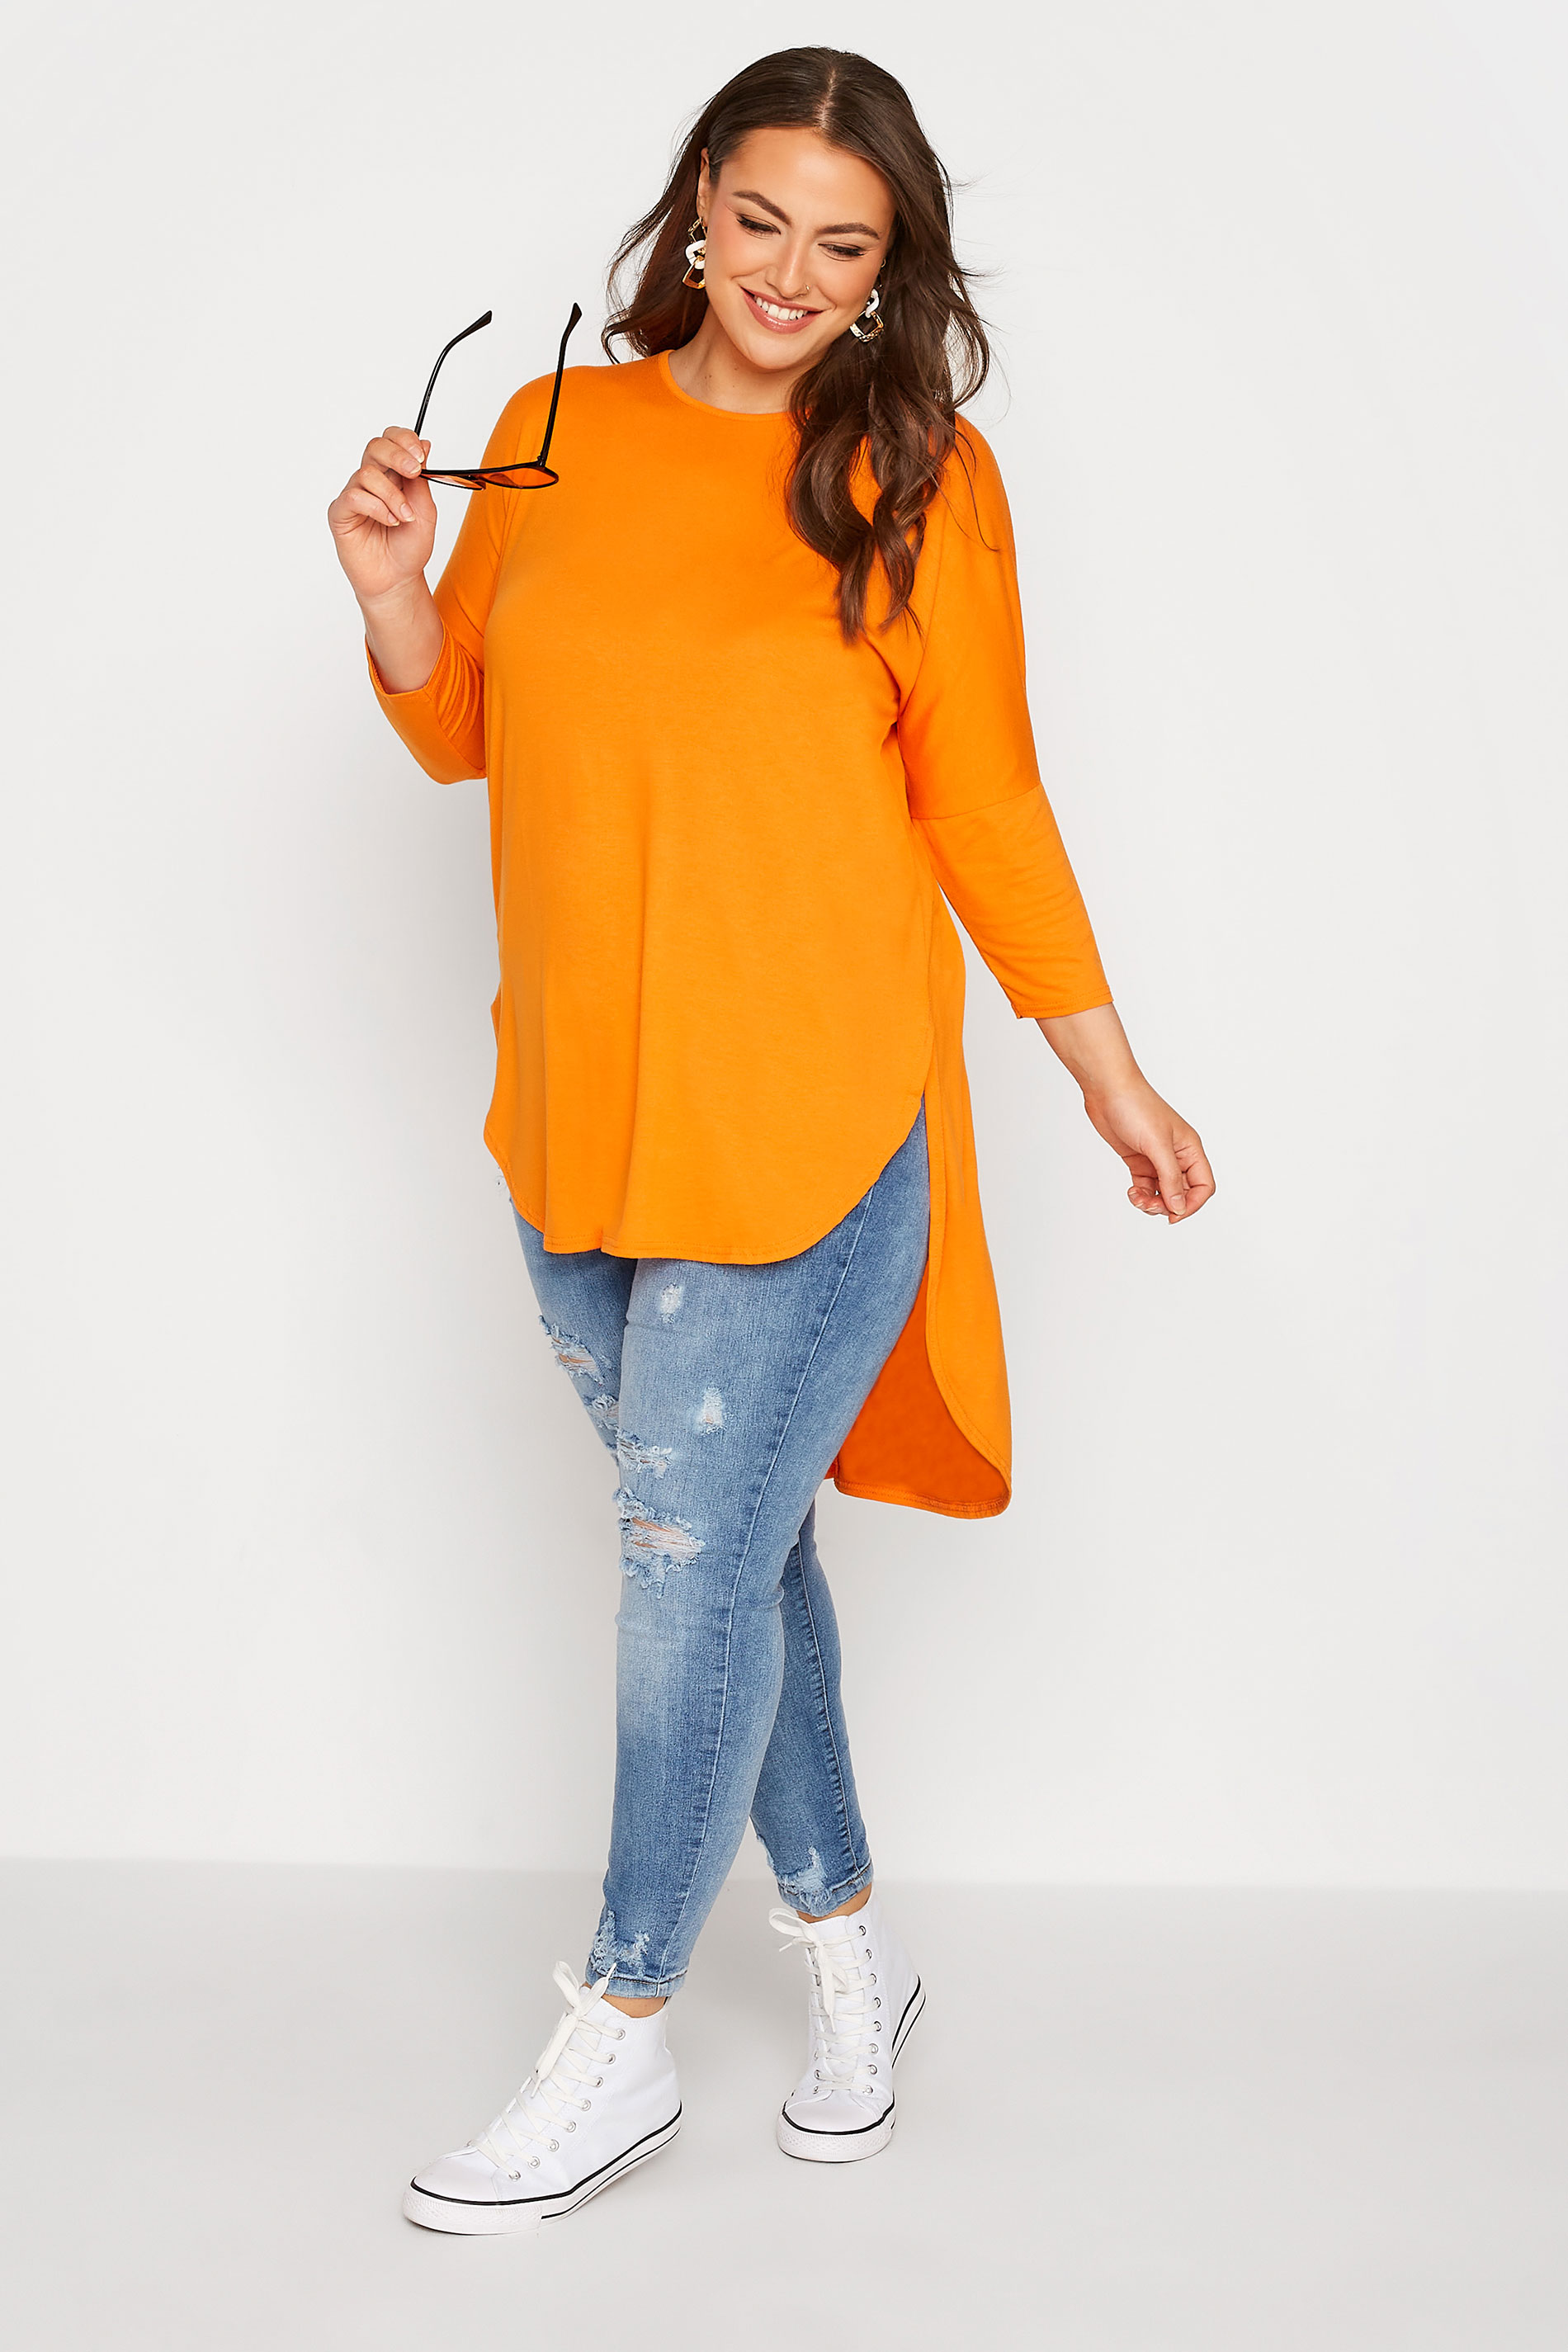 Grande taille  Tops Grande taille  Tops Ourlet Plongeant | LIMITED COLLECTION - T-Shirt Orange Manches Longues Ourlet Plongeant - DU13671